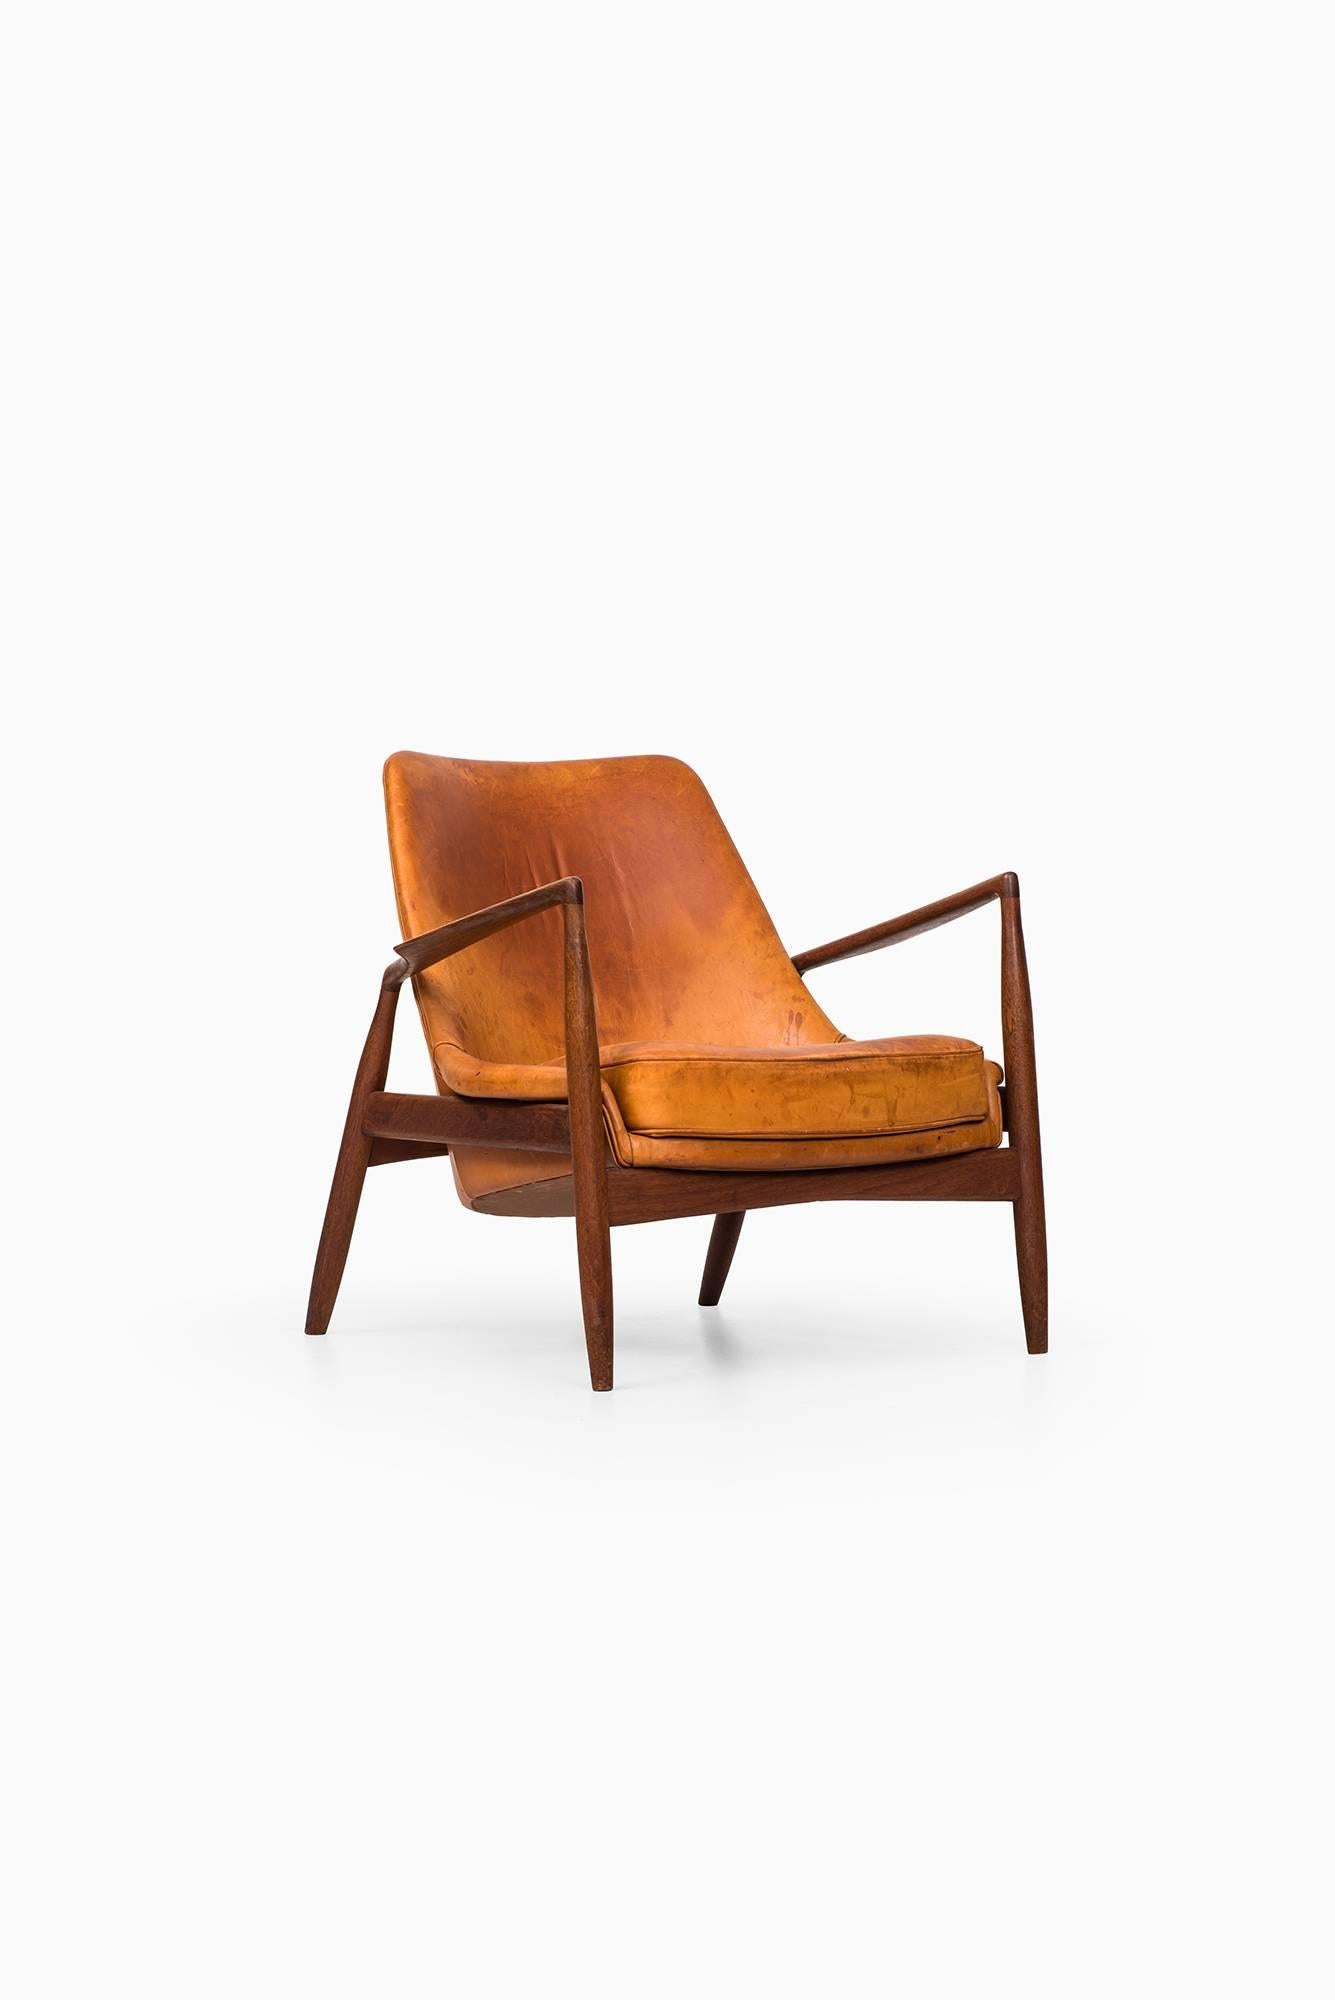 Leather Ib Kofod-Larsen Seal Easy Chair by OPE in Sweden